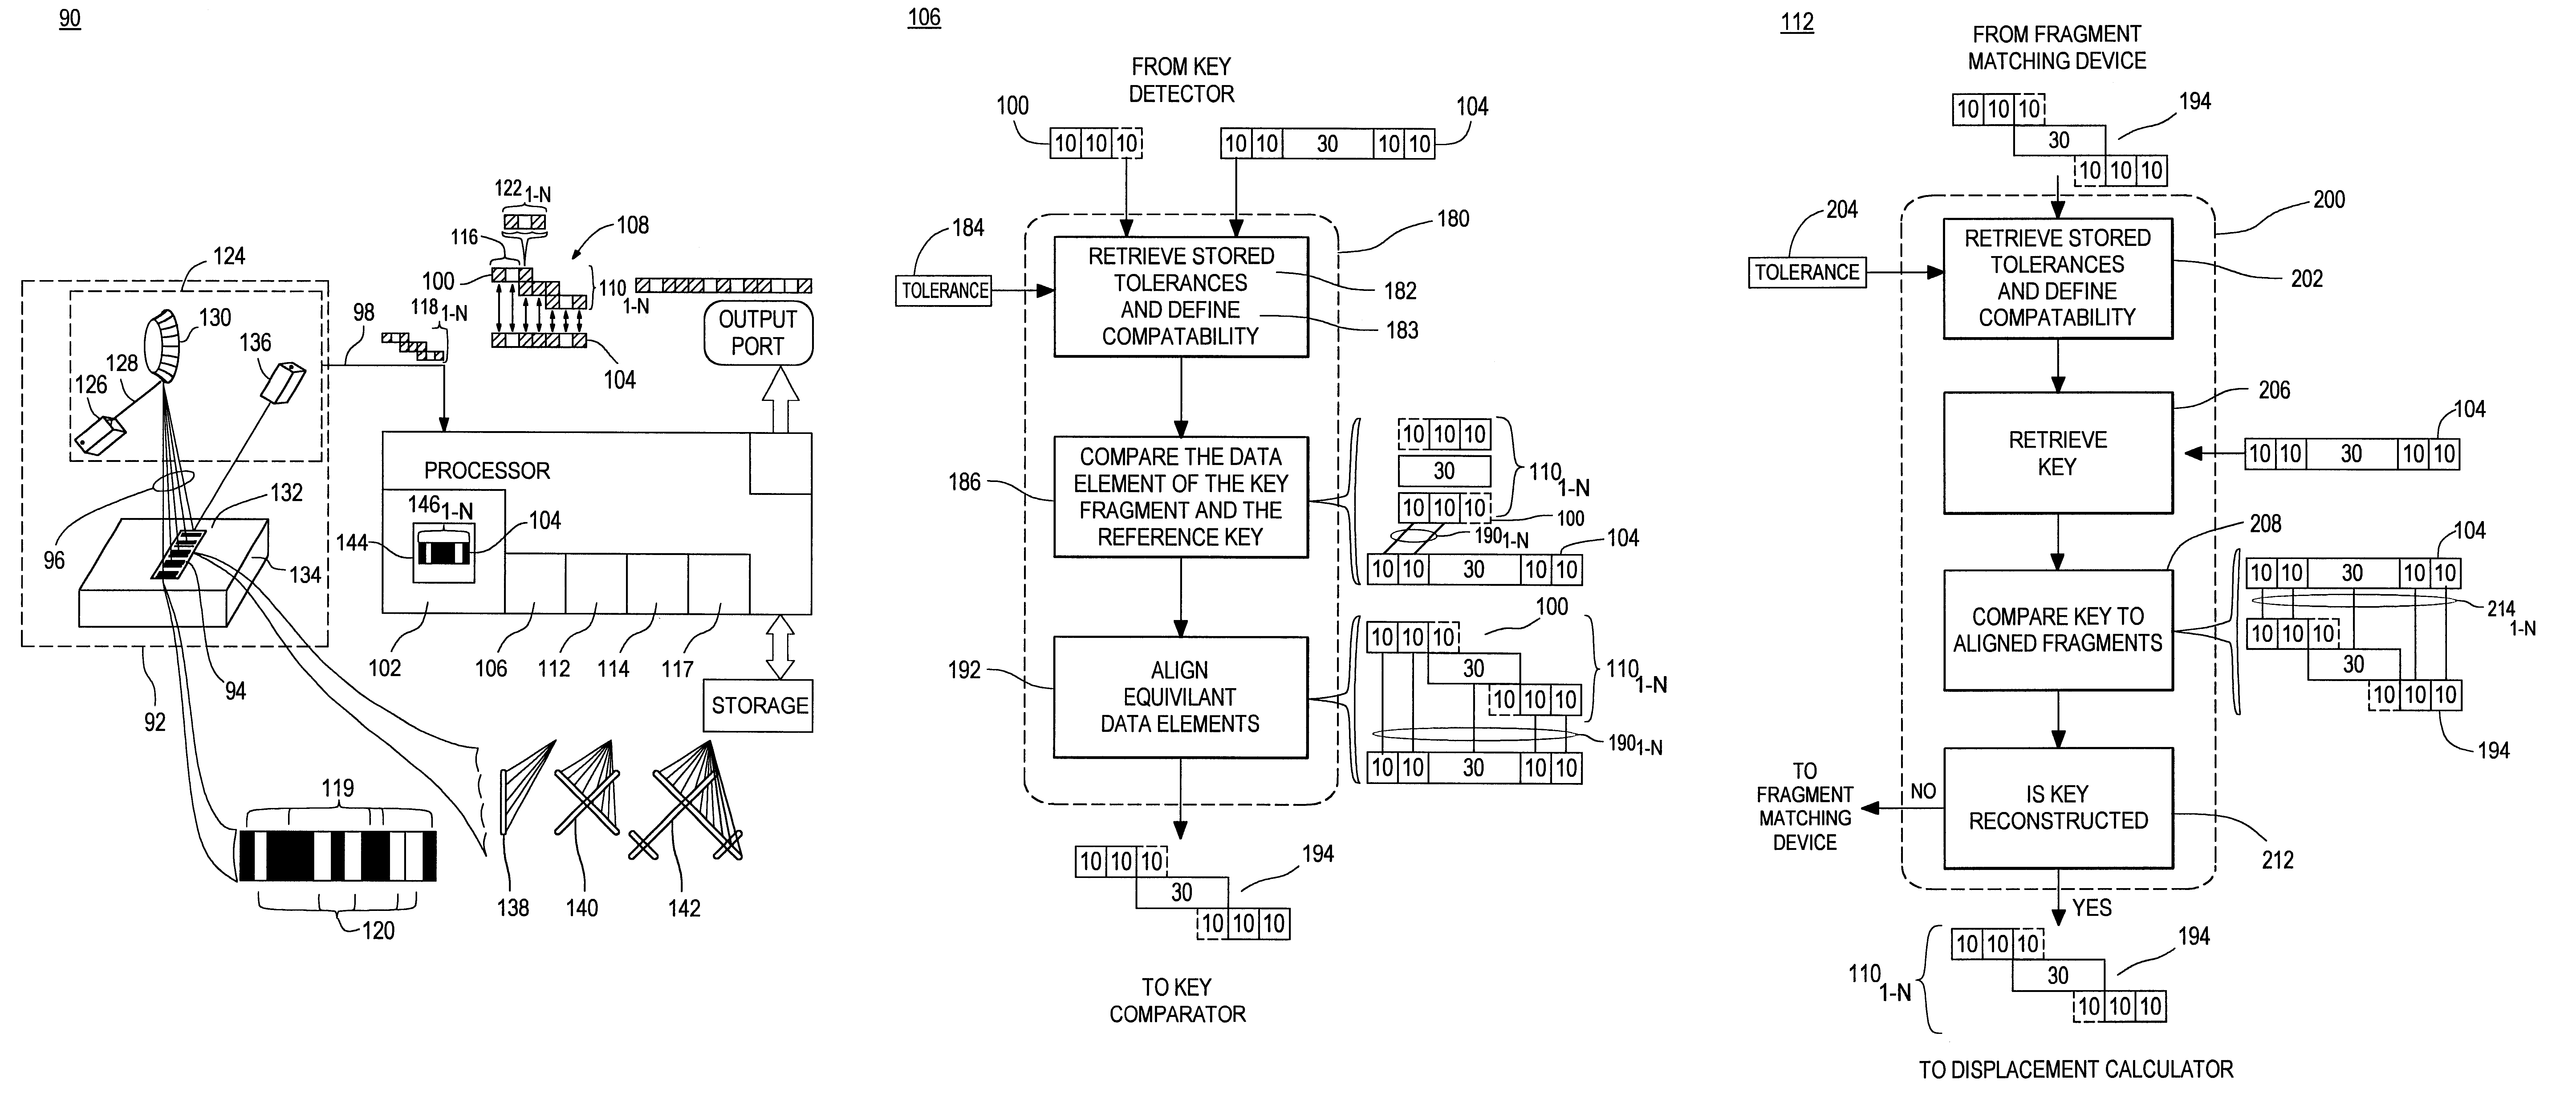 Bar code scanning system and method